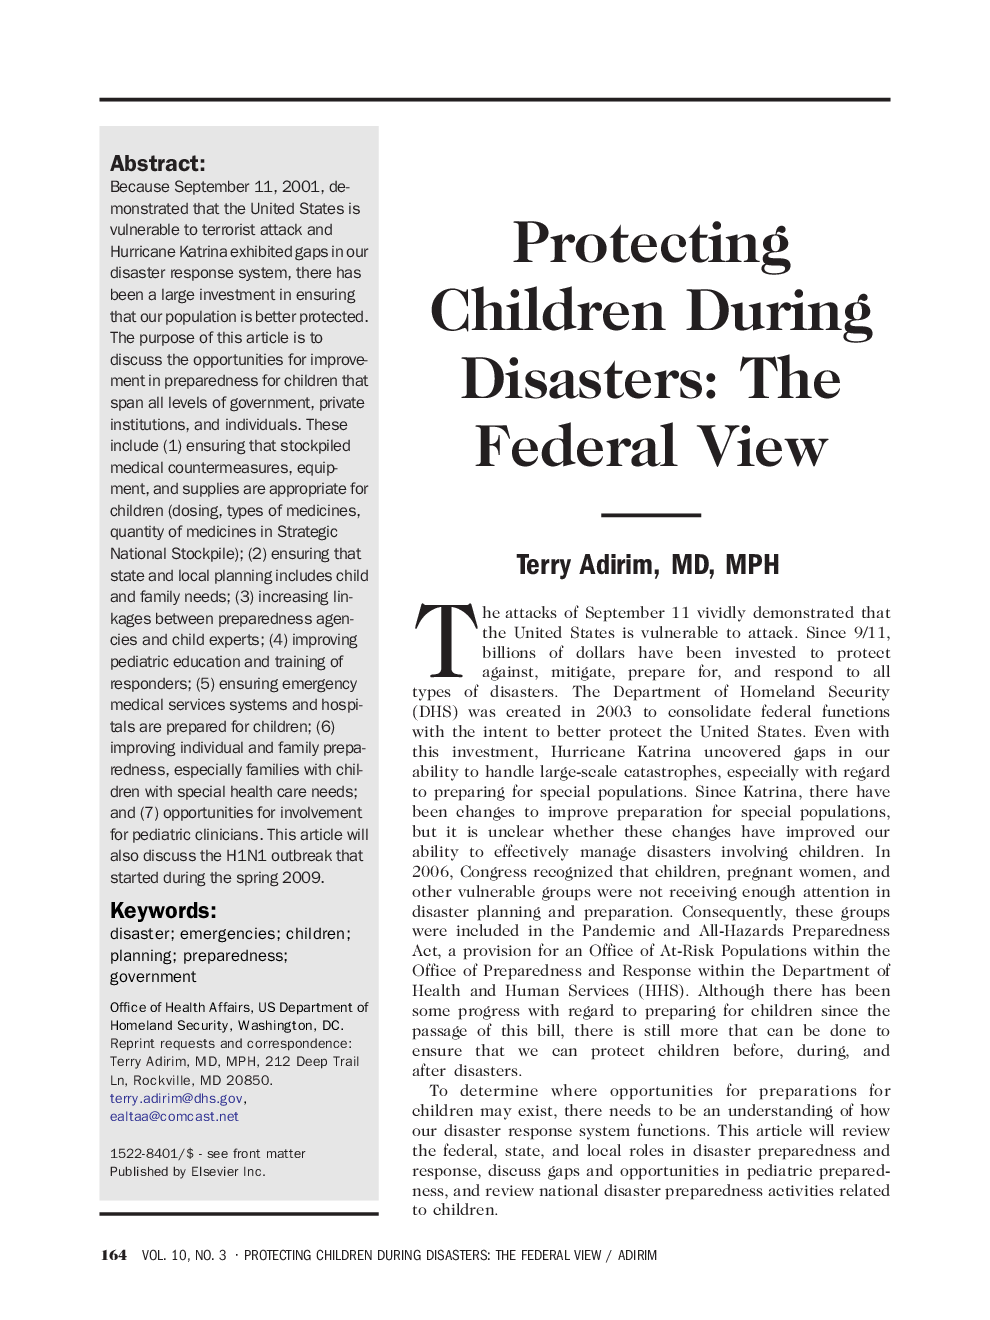 Protecting Children During Disasters: The Federal View